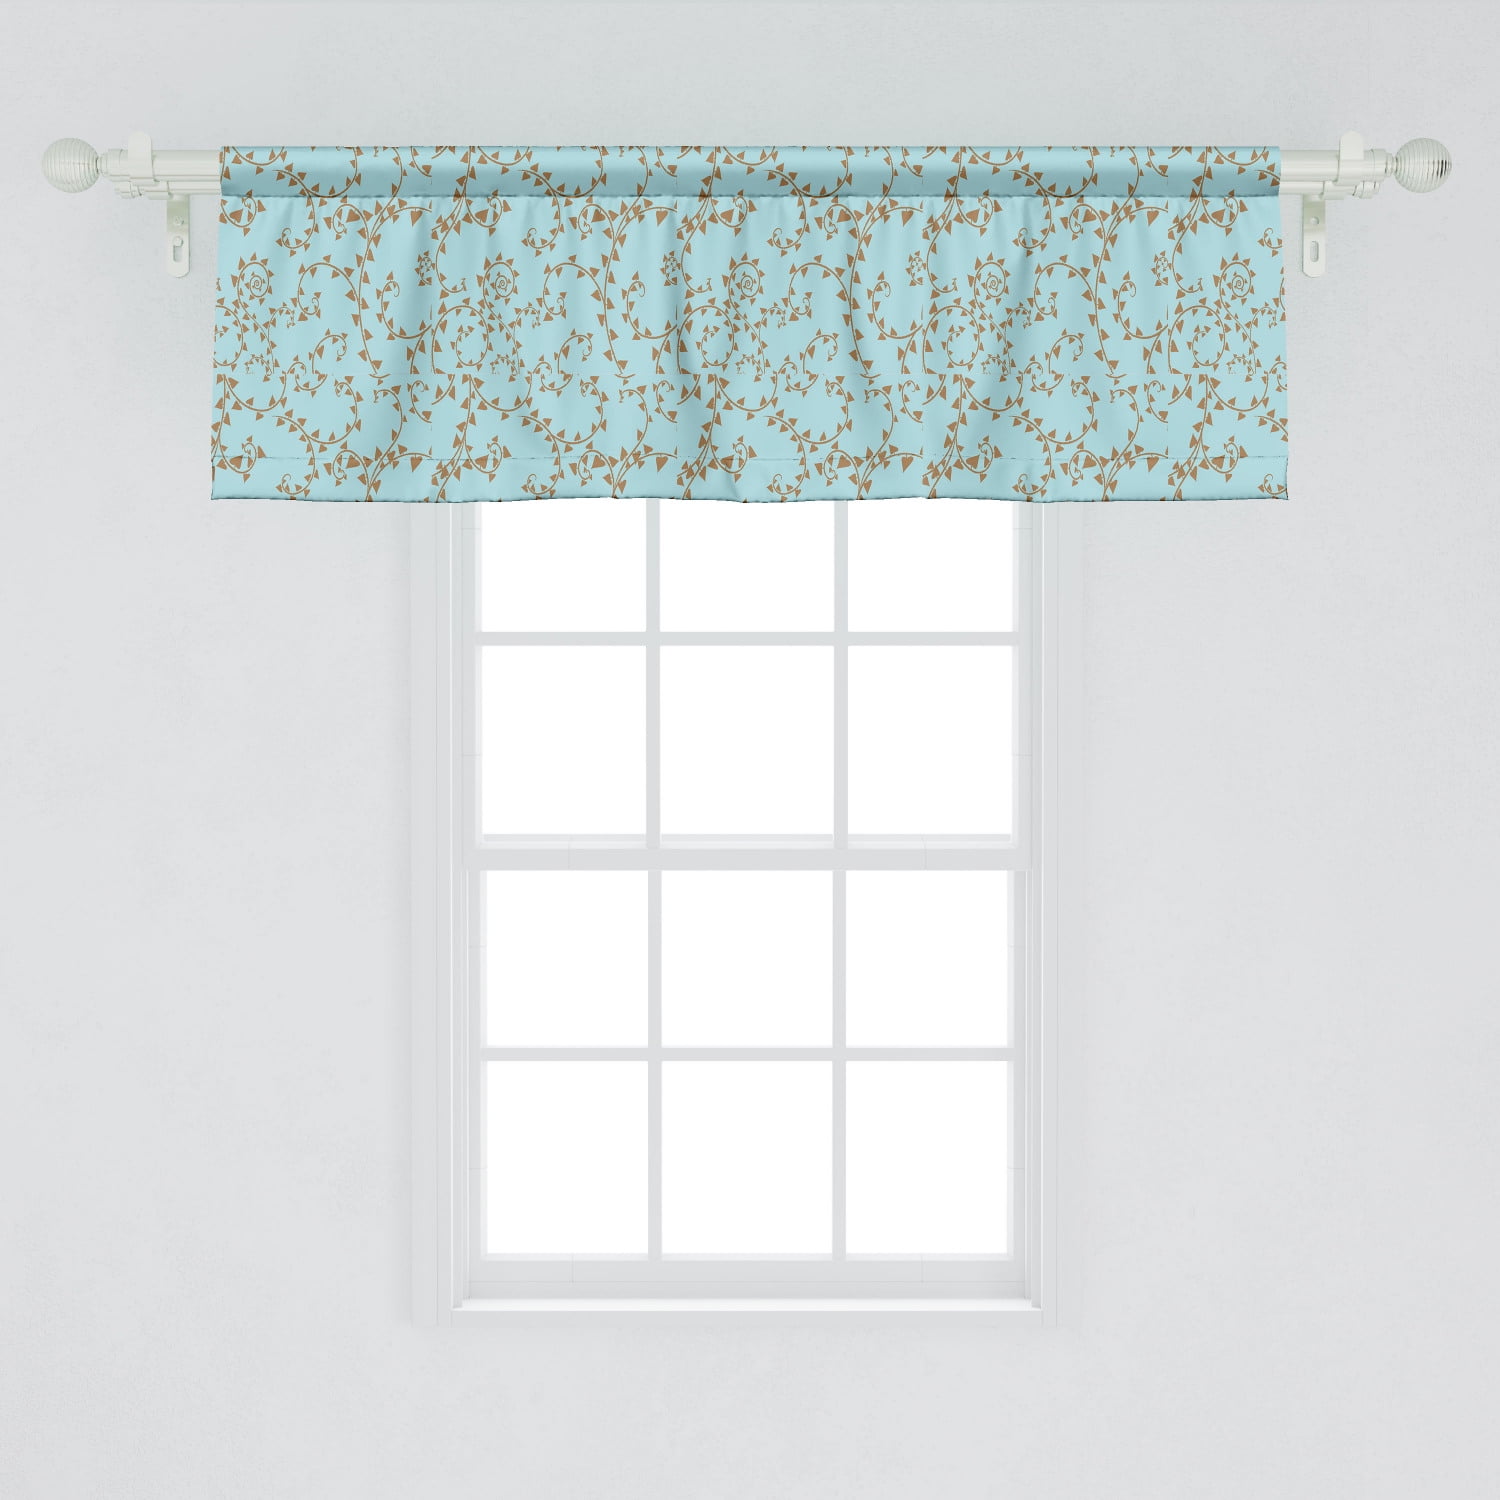 Ambesonne Brown and Blue Window Valance, Swirling Tree Branches with Leaves  Scroll Style Victorian, Curtain Valance for Kitchen Bedroom Decor with Rod  ...